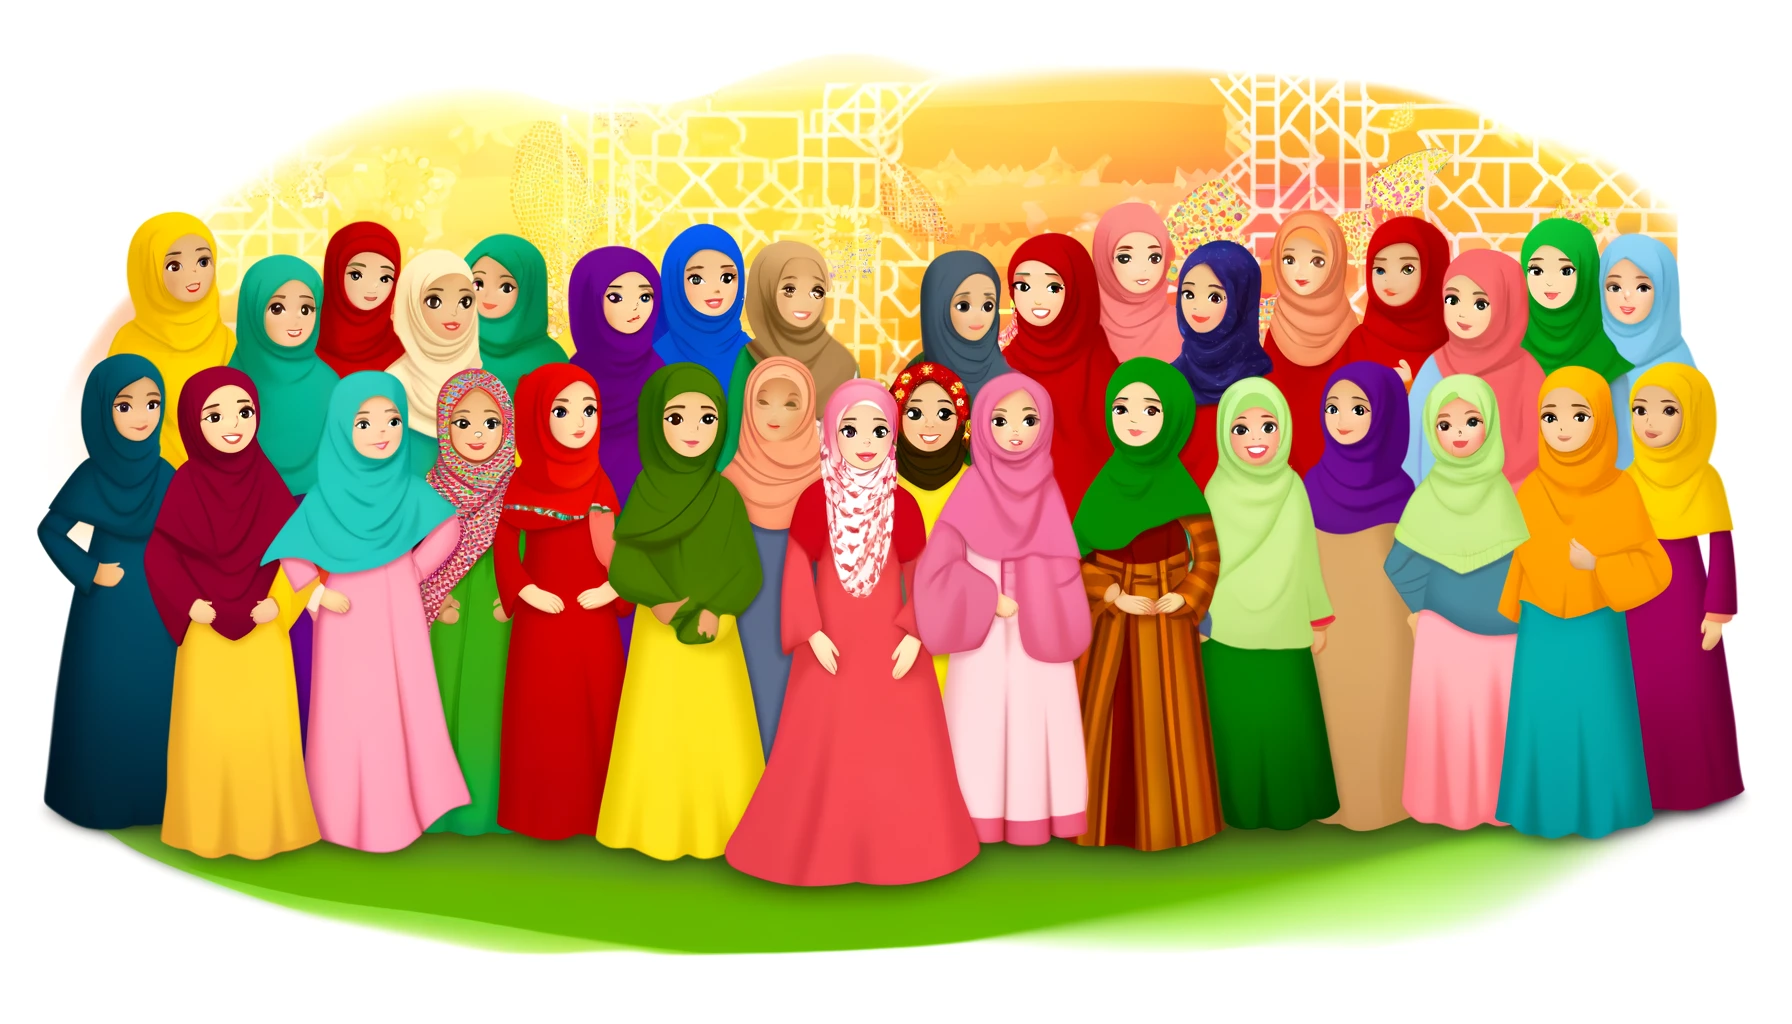 Diverse young Muslim girls wearing colorful hijabs gathered in a park, symbolizing unity and cultural diversity.